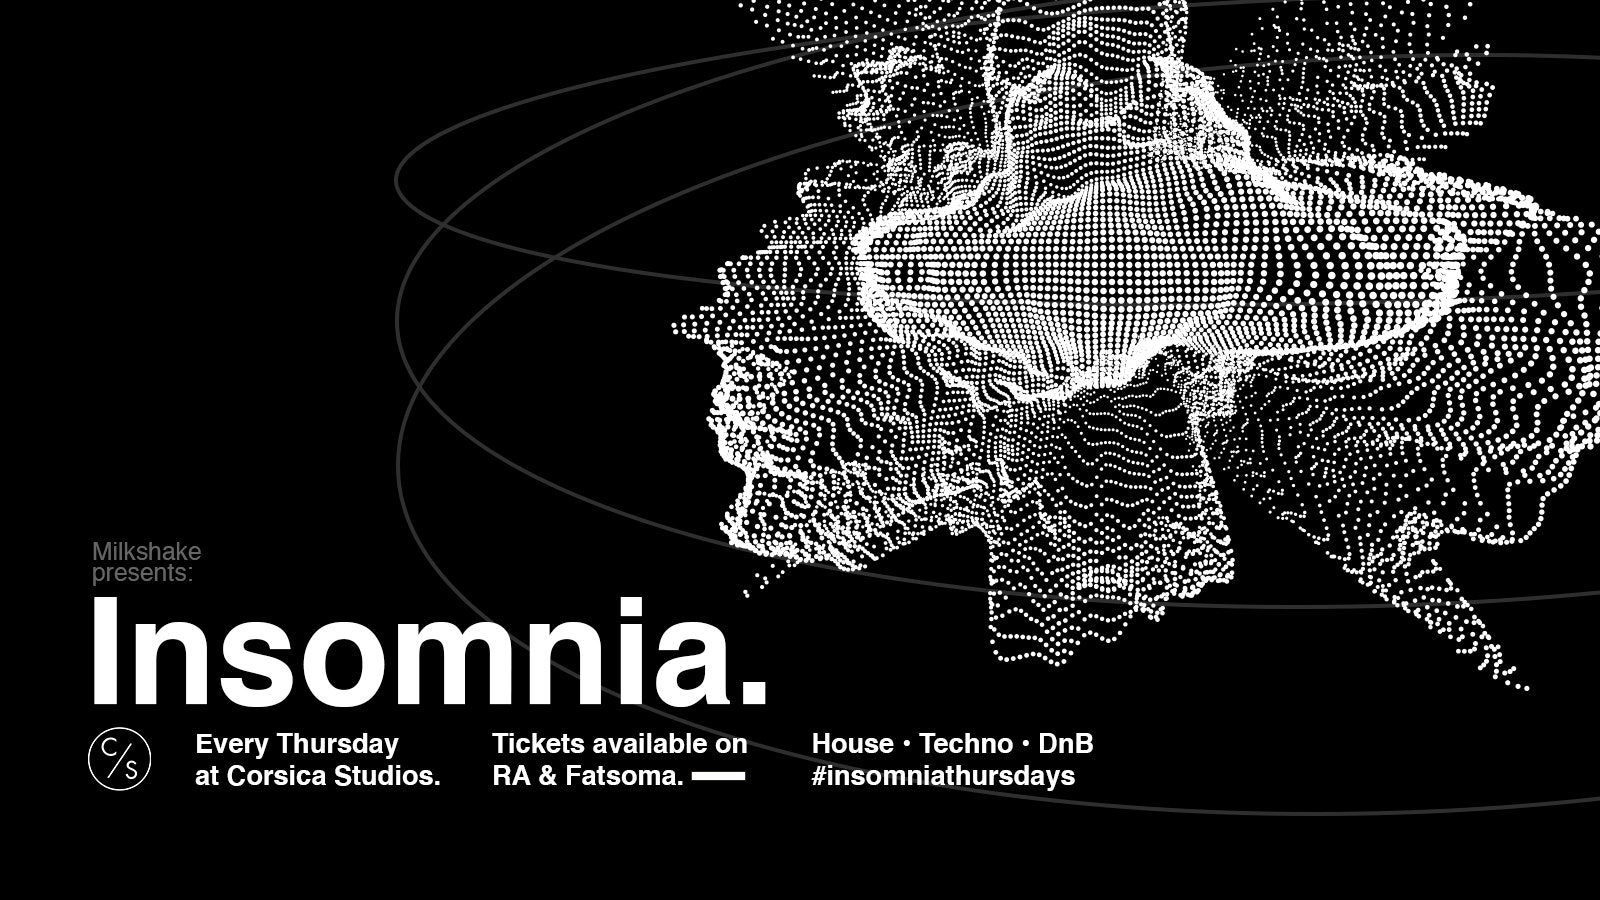 Tonight! Insomnia Launch Party | House, Techno, DnB – £3 Tickets!